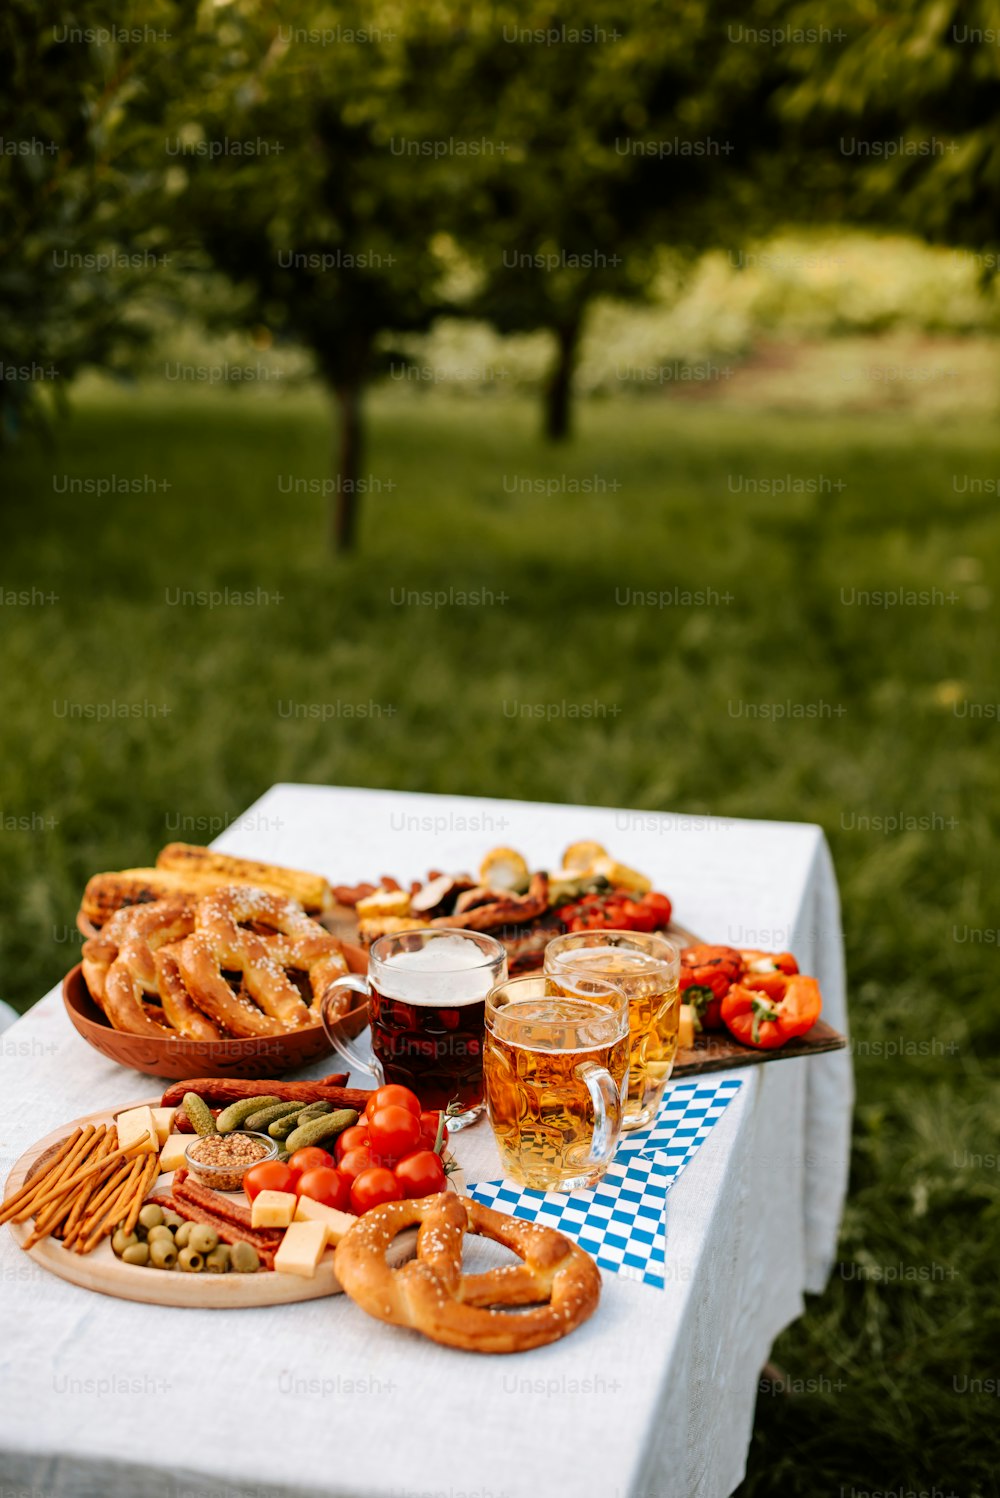 a picnic table with food and drinks on it